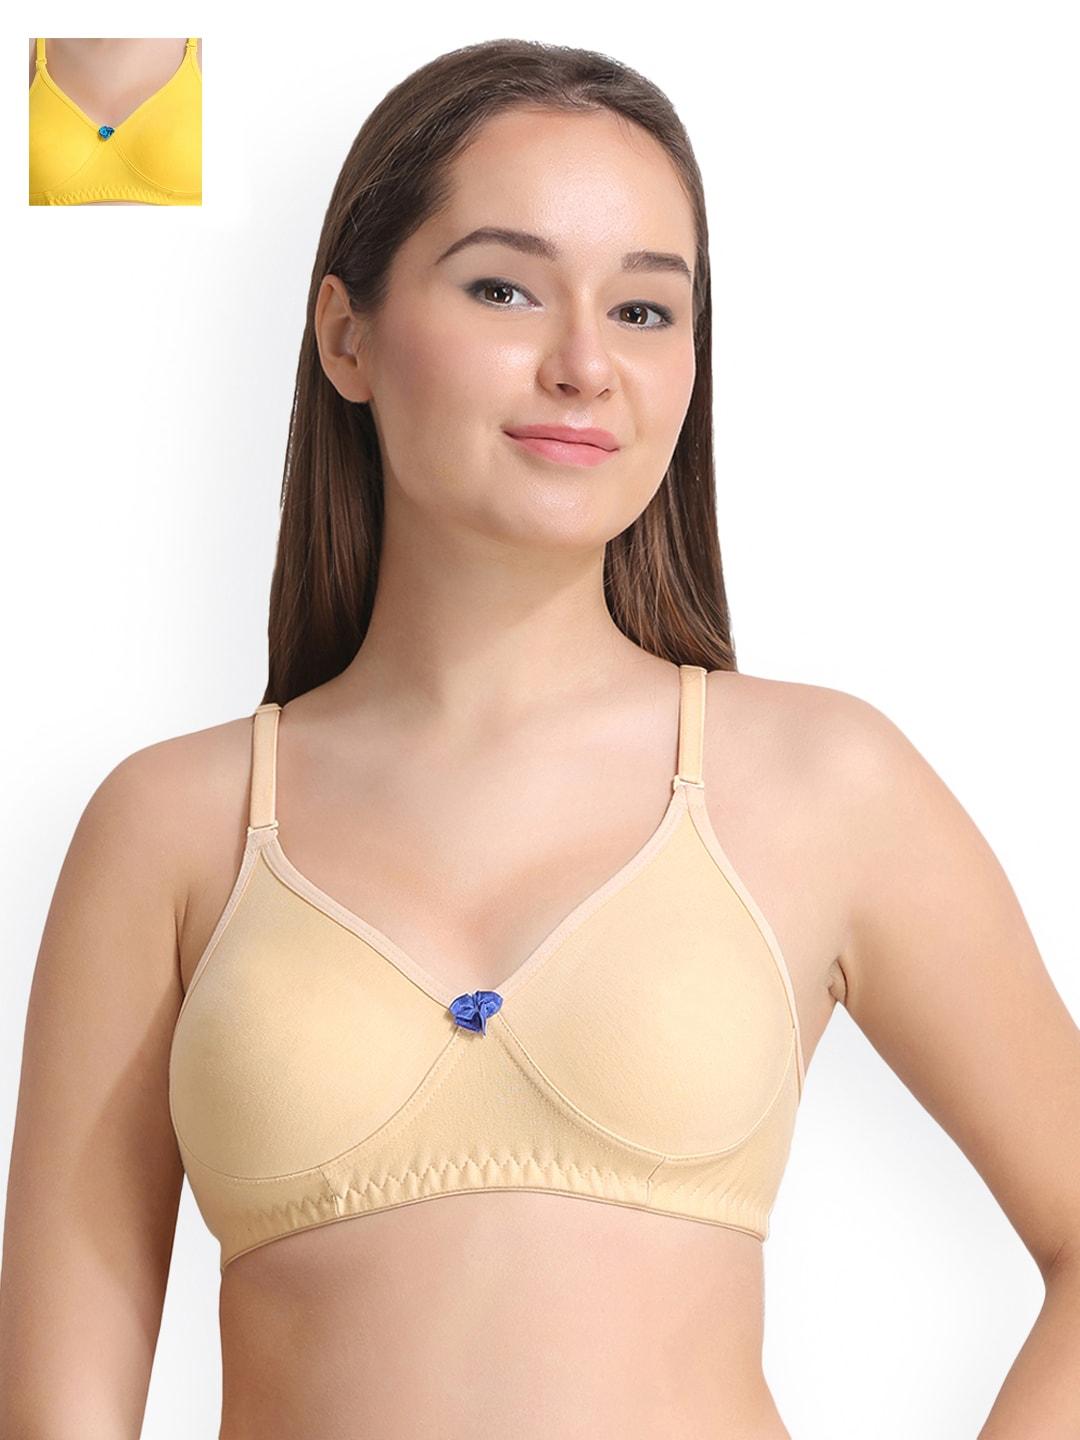 leading lady pack of 2 full-coverage bras lldinky-2-skn-yl